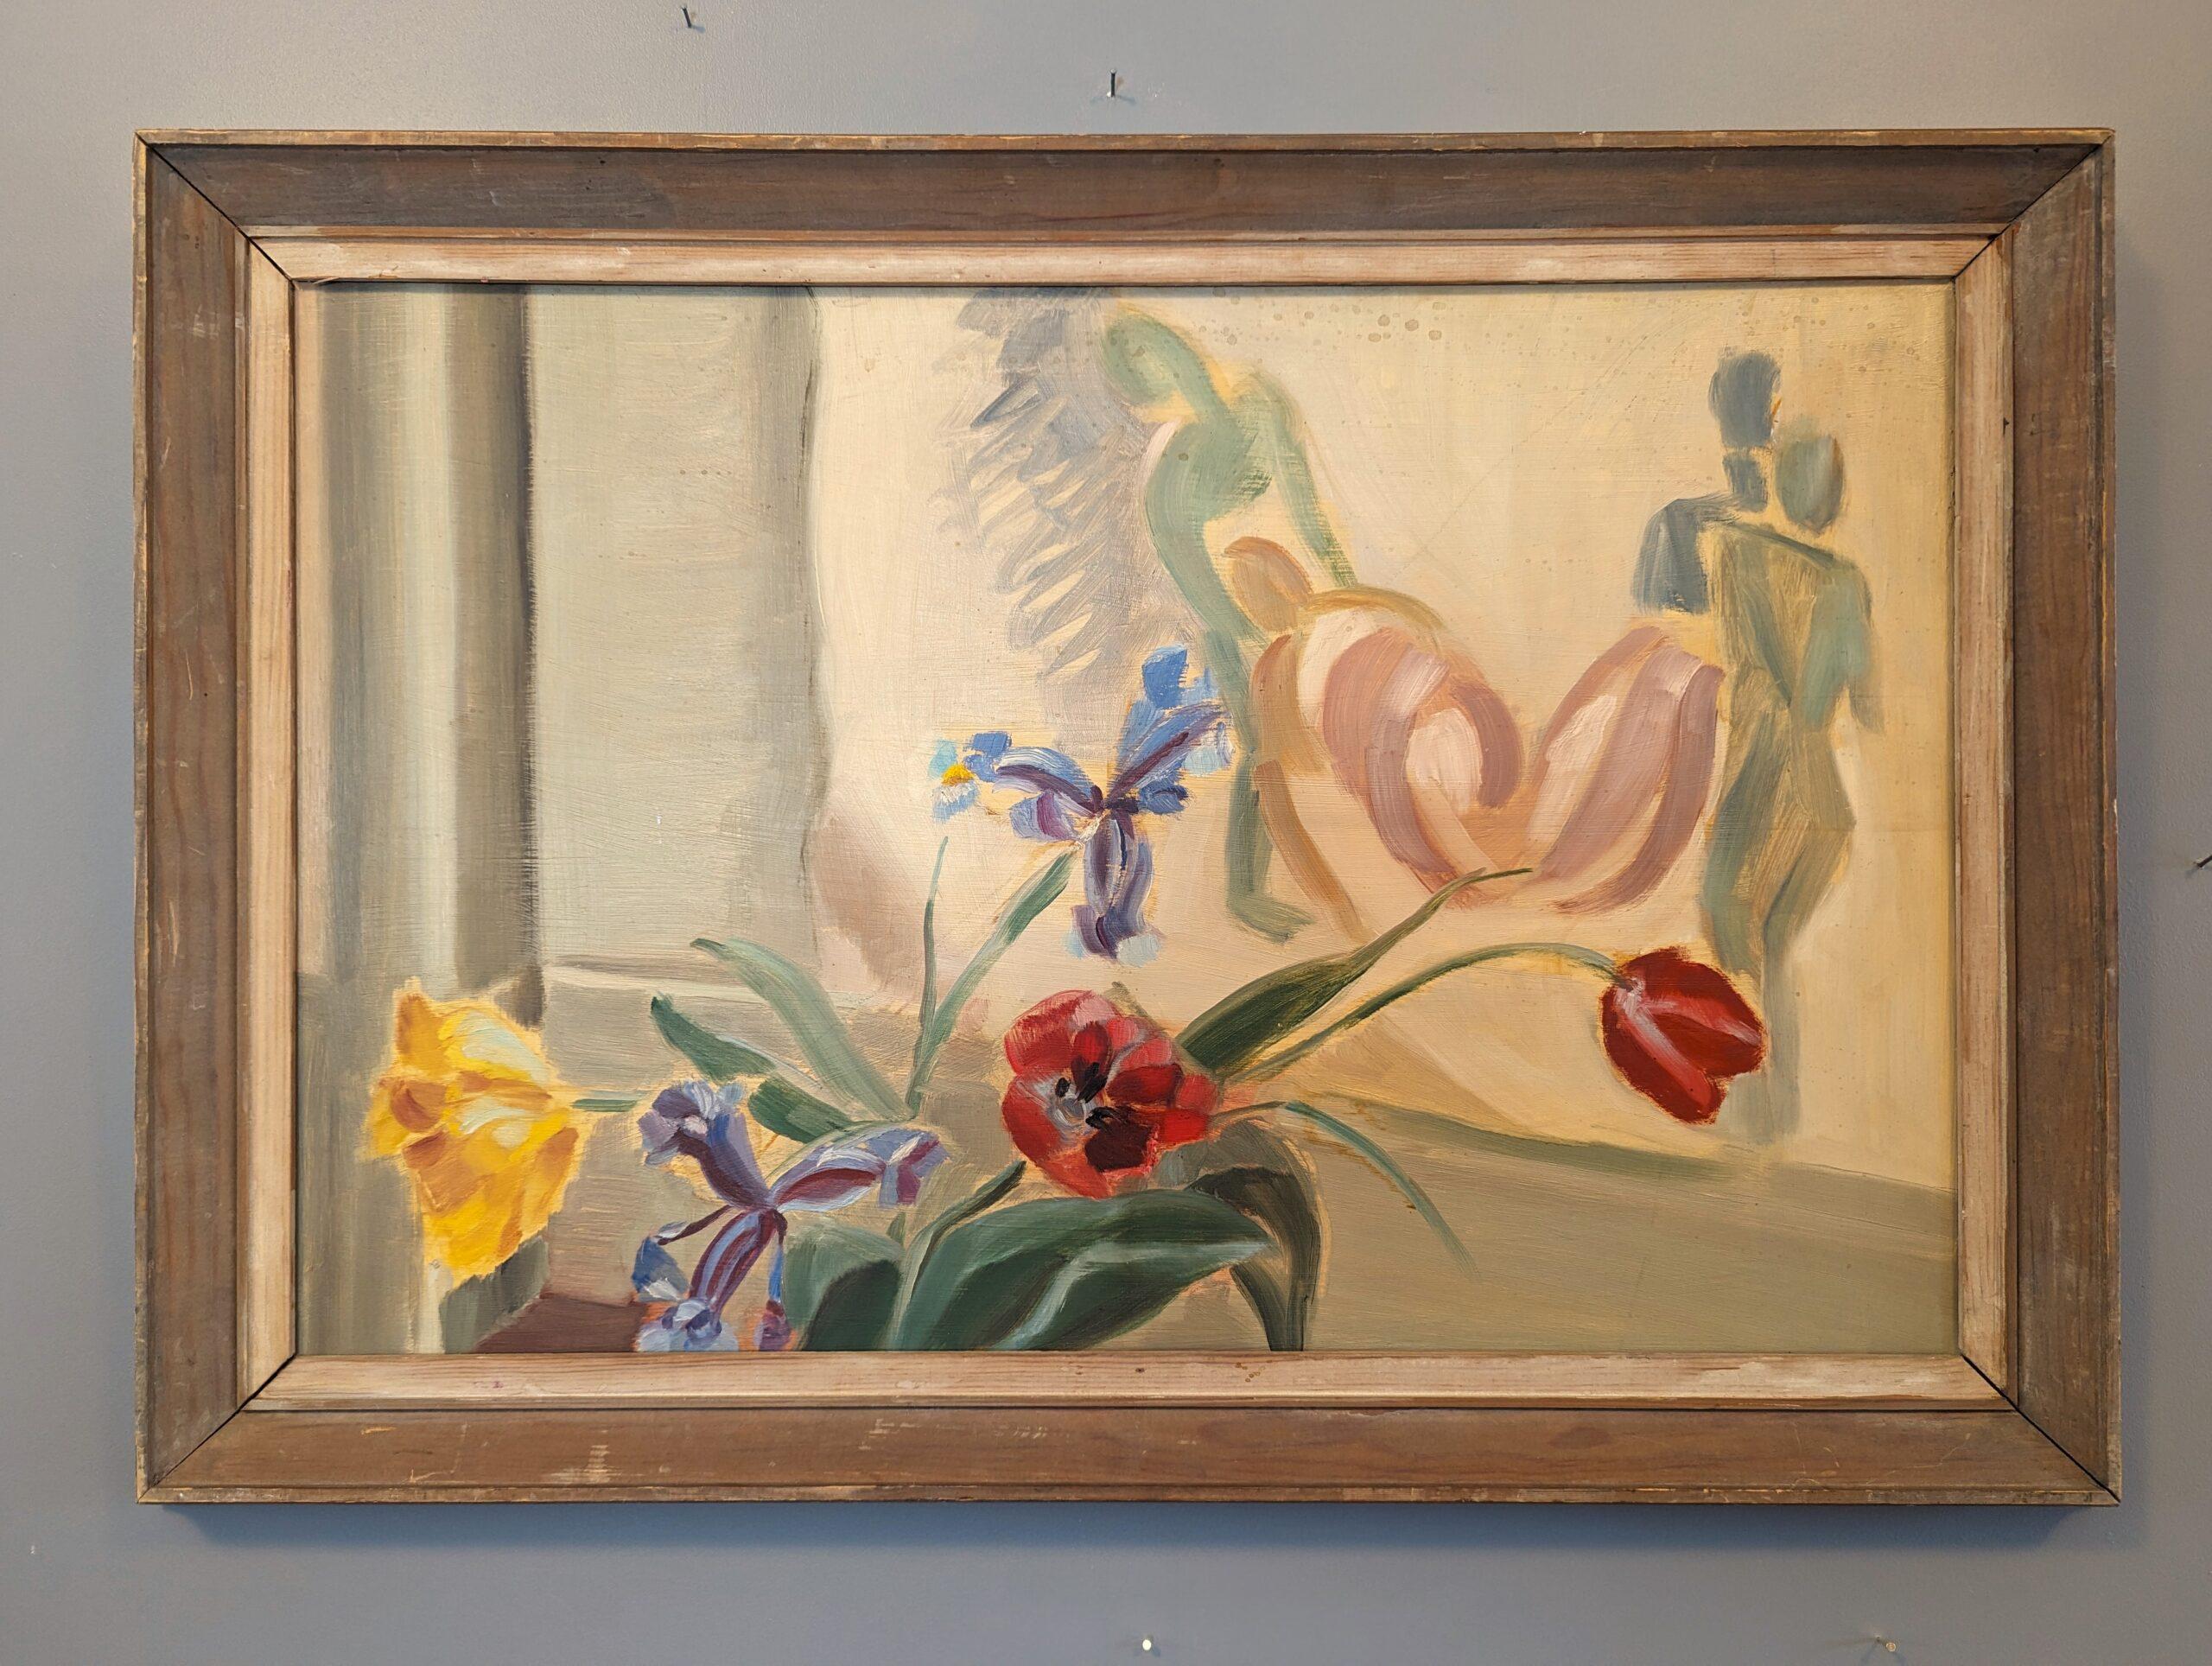 FLORAL & FIGURINE
Size: 50 x 71 cm (including frame)
Oil on Canvas

An elegant and serene mid-century still life interior scene, executed in oil on board.

The composition presents a window sill adorned with an assortment of vibrant yet delicate